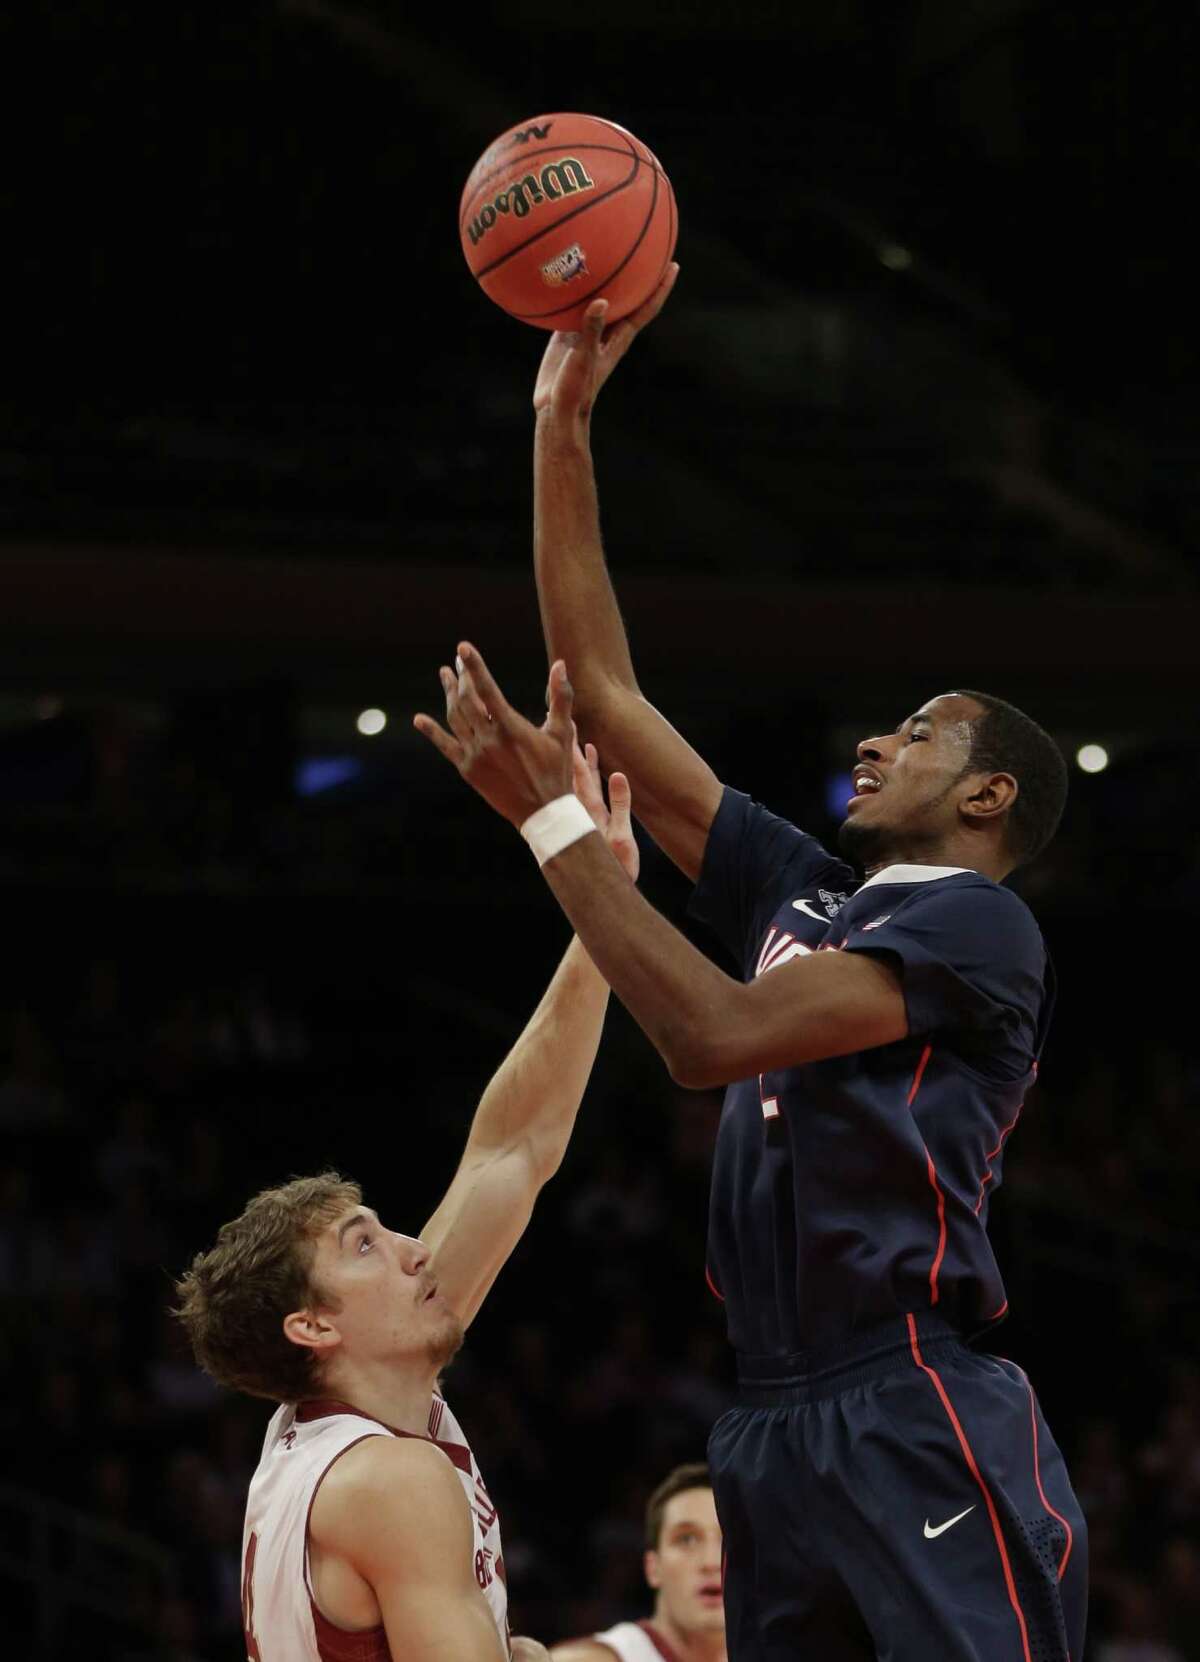 Connecticut's DeAndre Daniels, right, shoots over Boston College's Eddie Odio during the first half of an NCAA college basketball game on Thursday, Nov. 21, 2013, in New York.